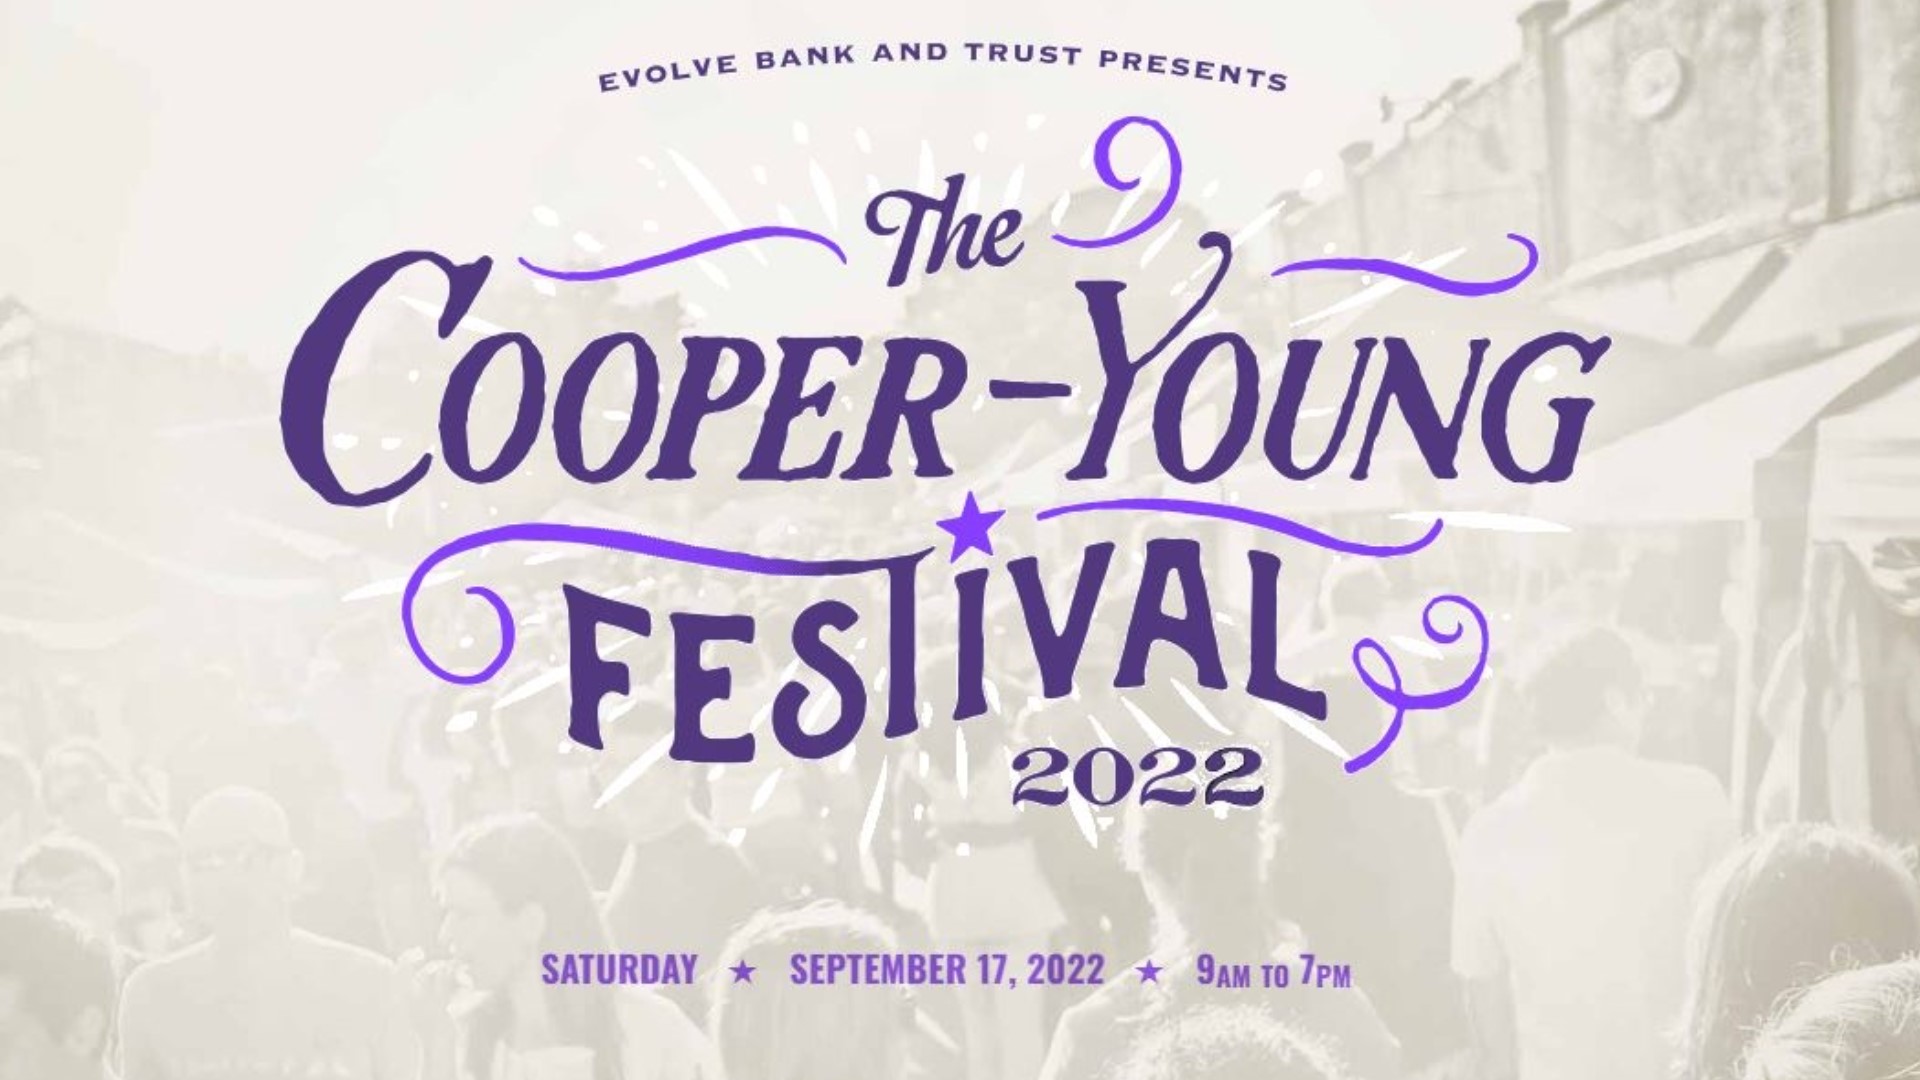 The 2022 Cooper-Young Festival returns Sept. 17 from 9 a.m. to 7 p.m.